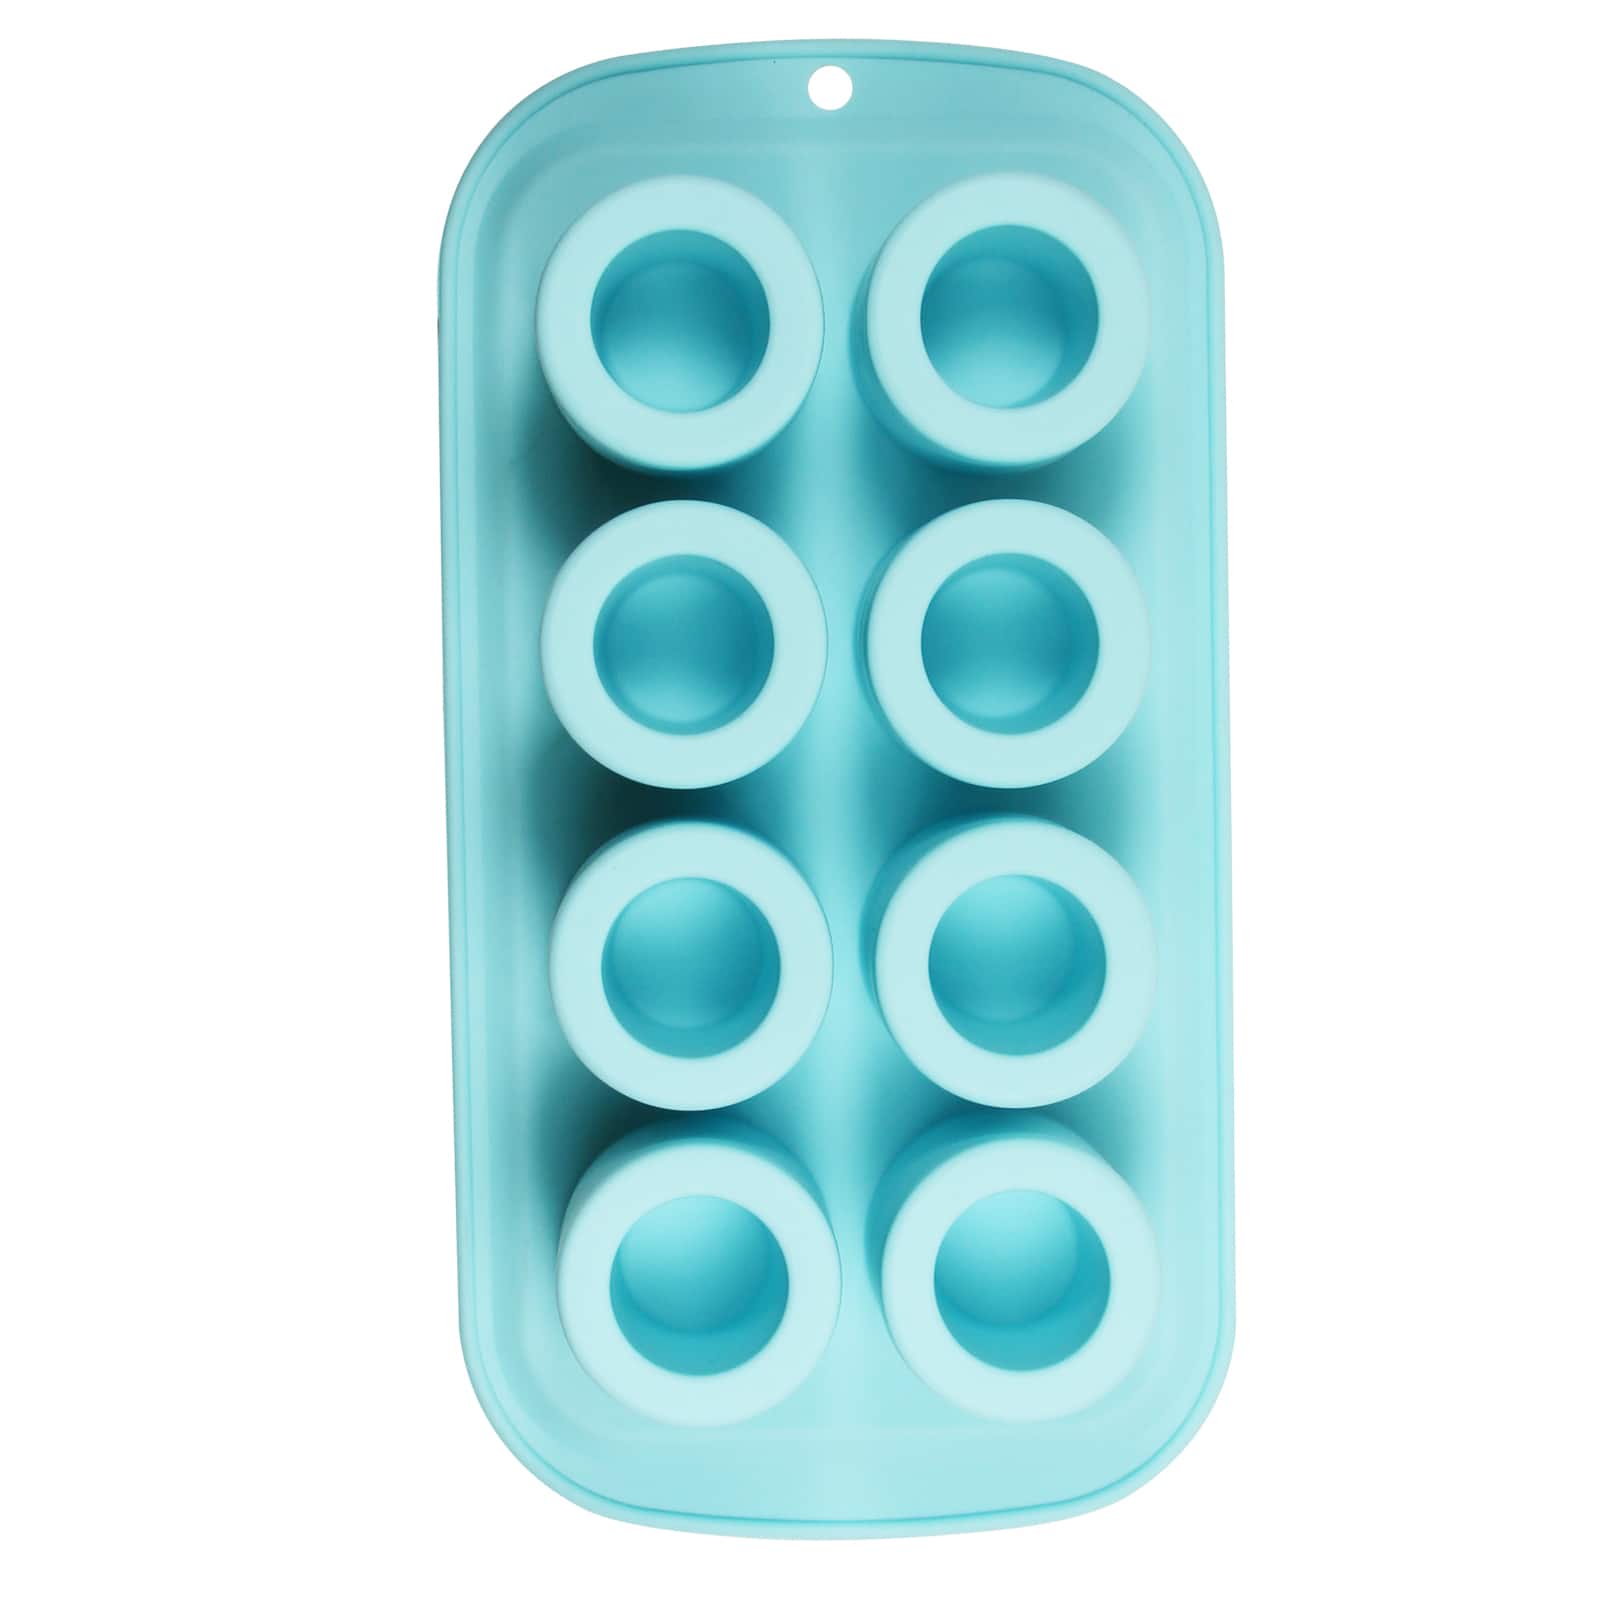 Shop For The Heart Silicone Chocolate Mold By Celebrate It At Michaels